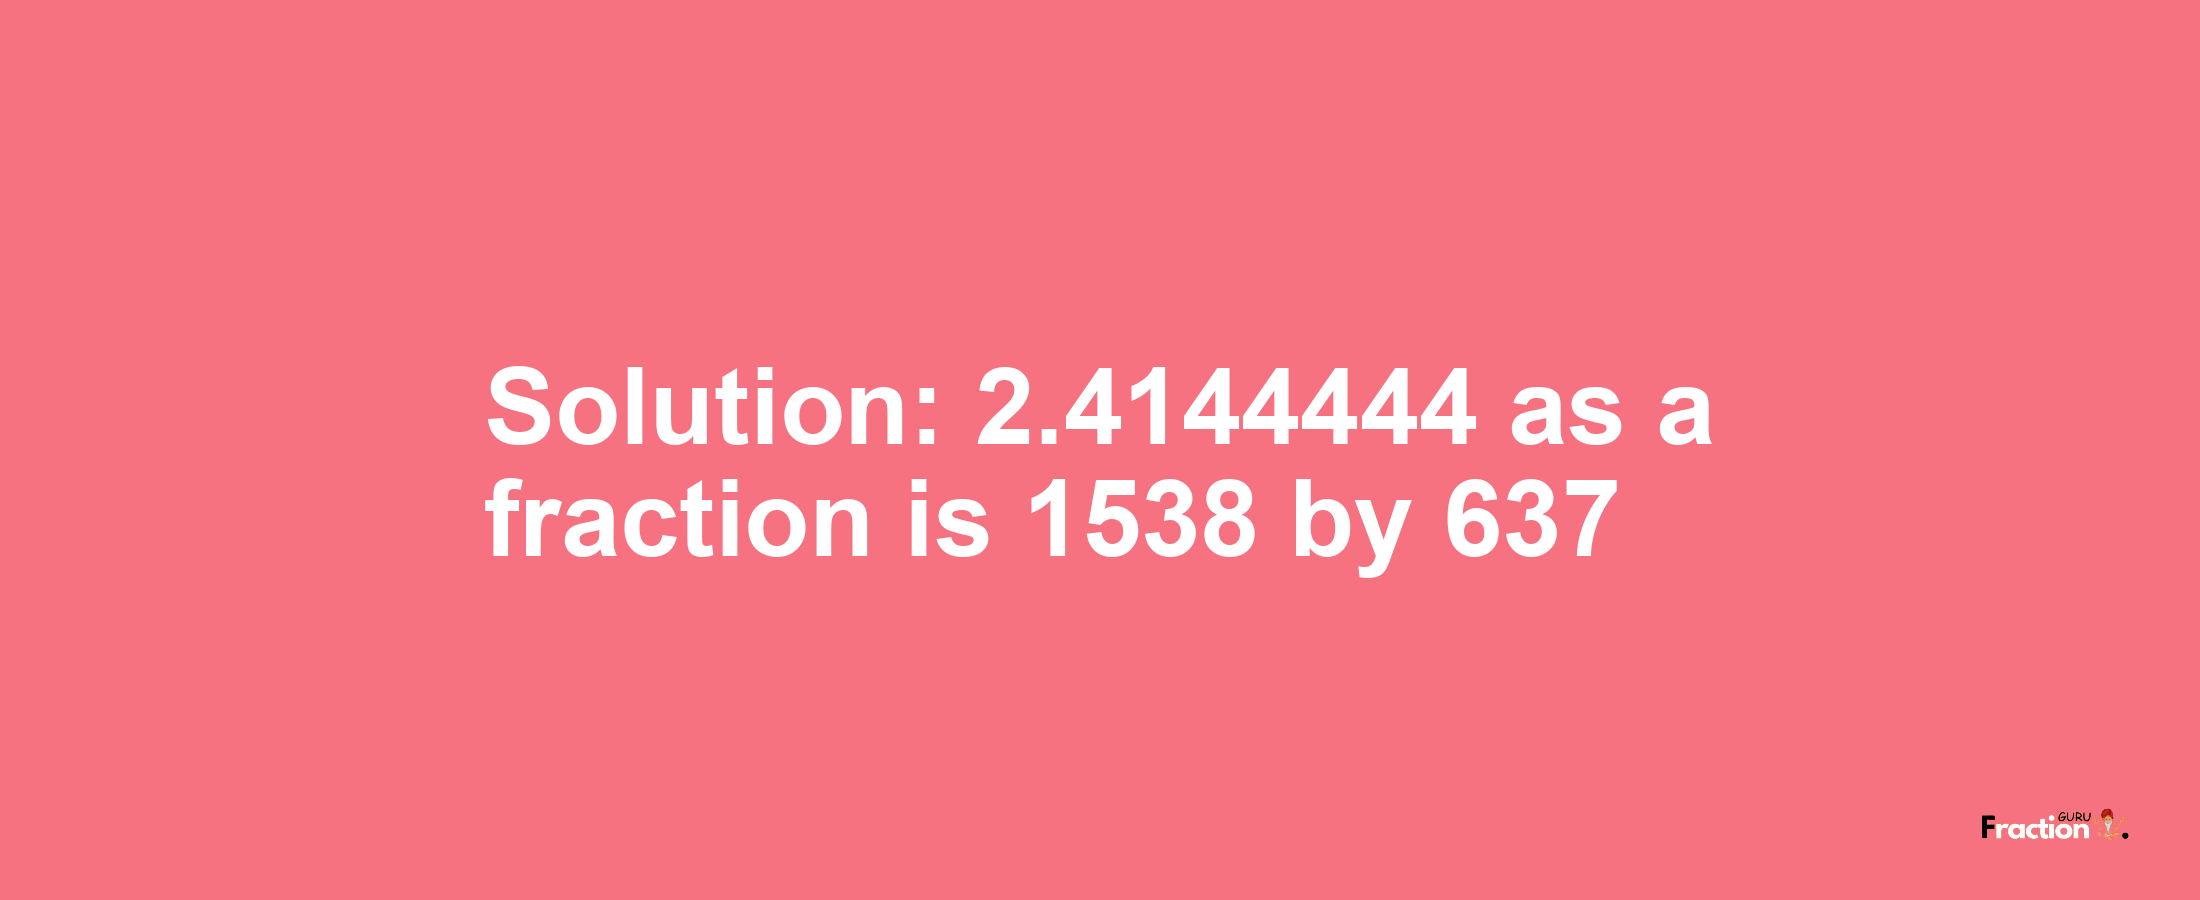 Solution:2.4144444 as a fraction is 1538/637